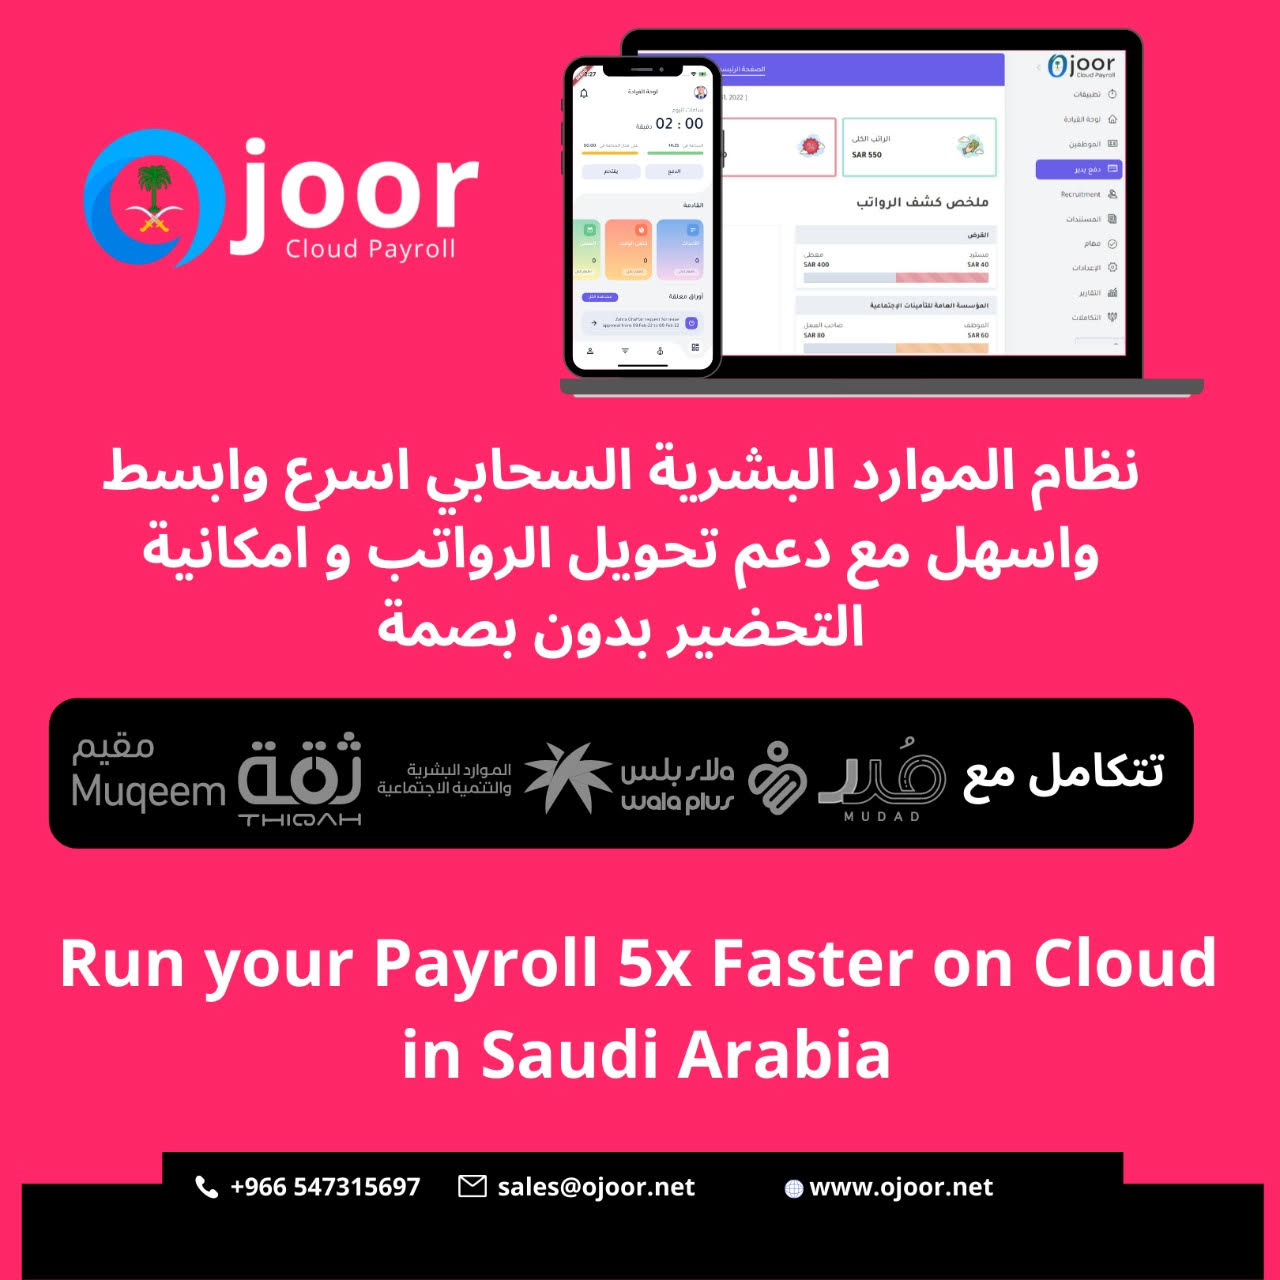 What are the Essential Functions of Payroll Software in Saudi?